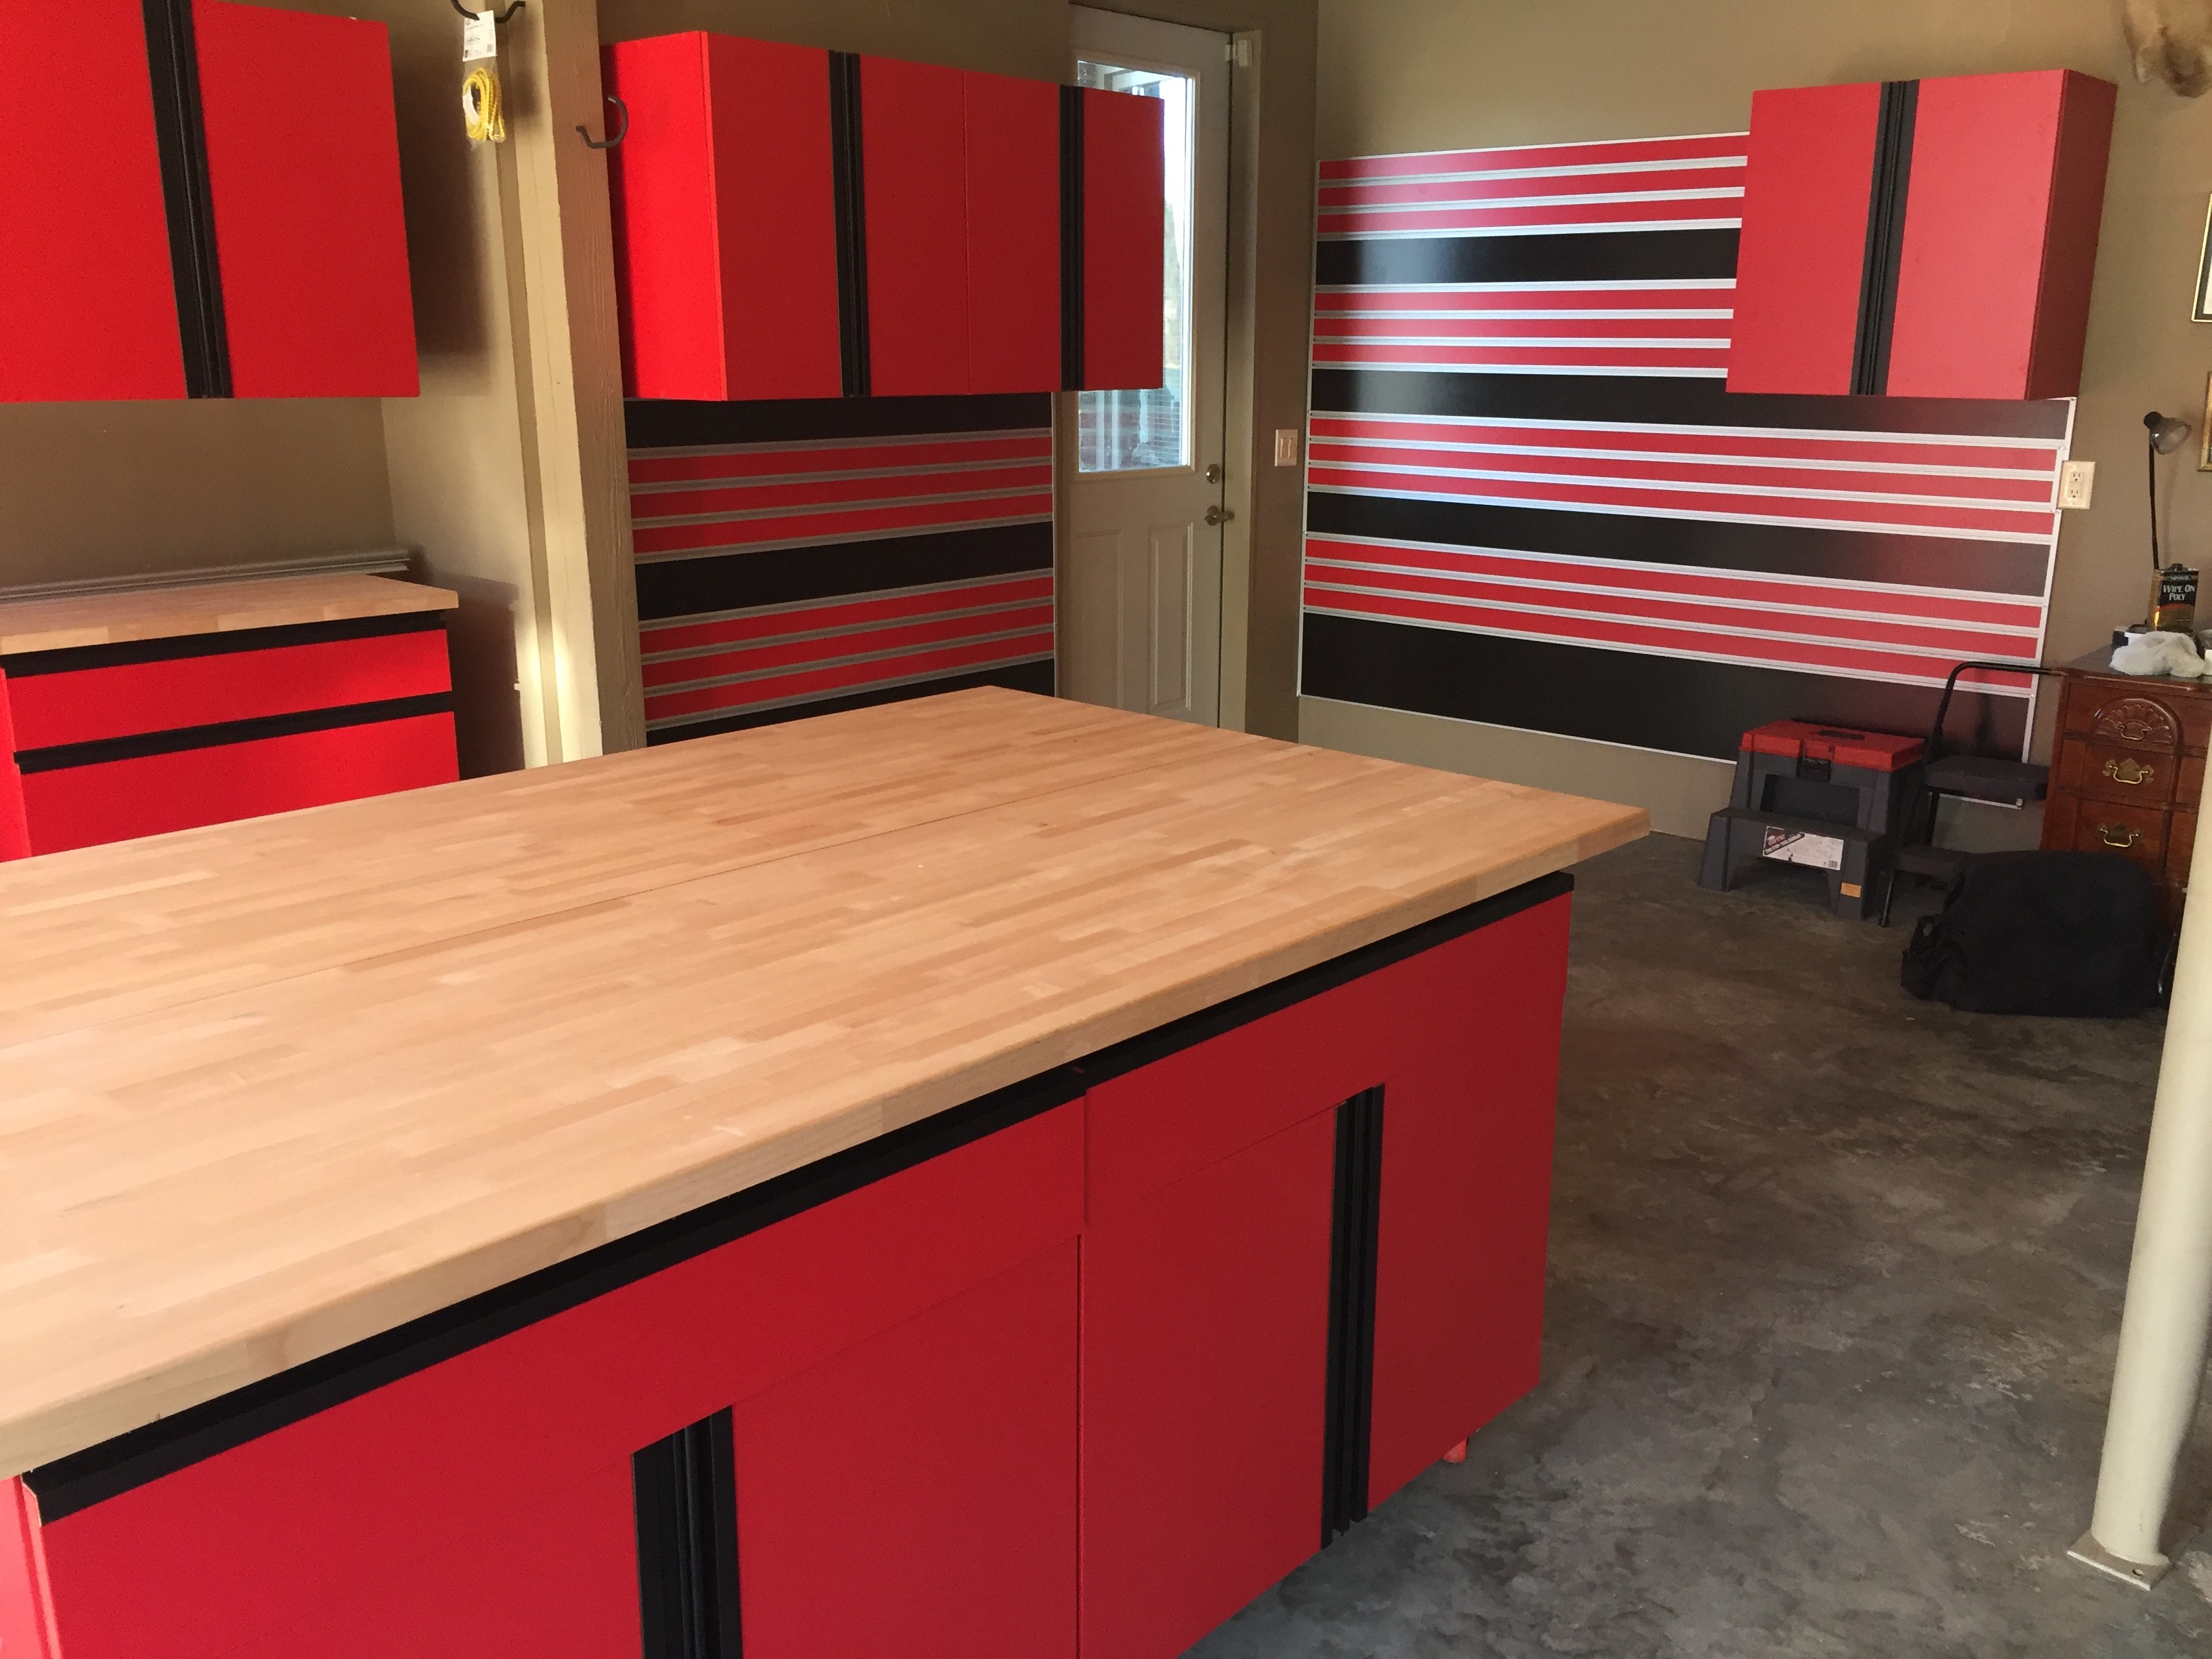 Red Cabinets and Red Slatwall